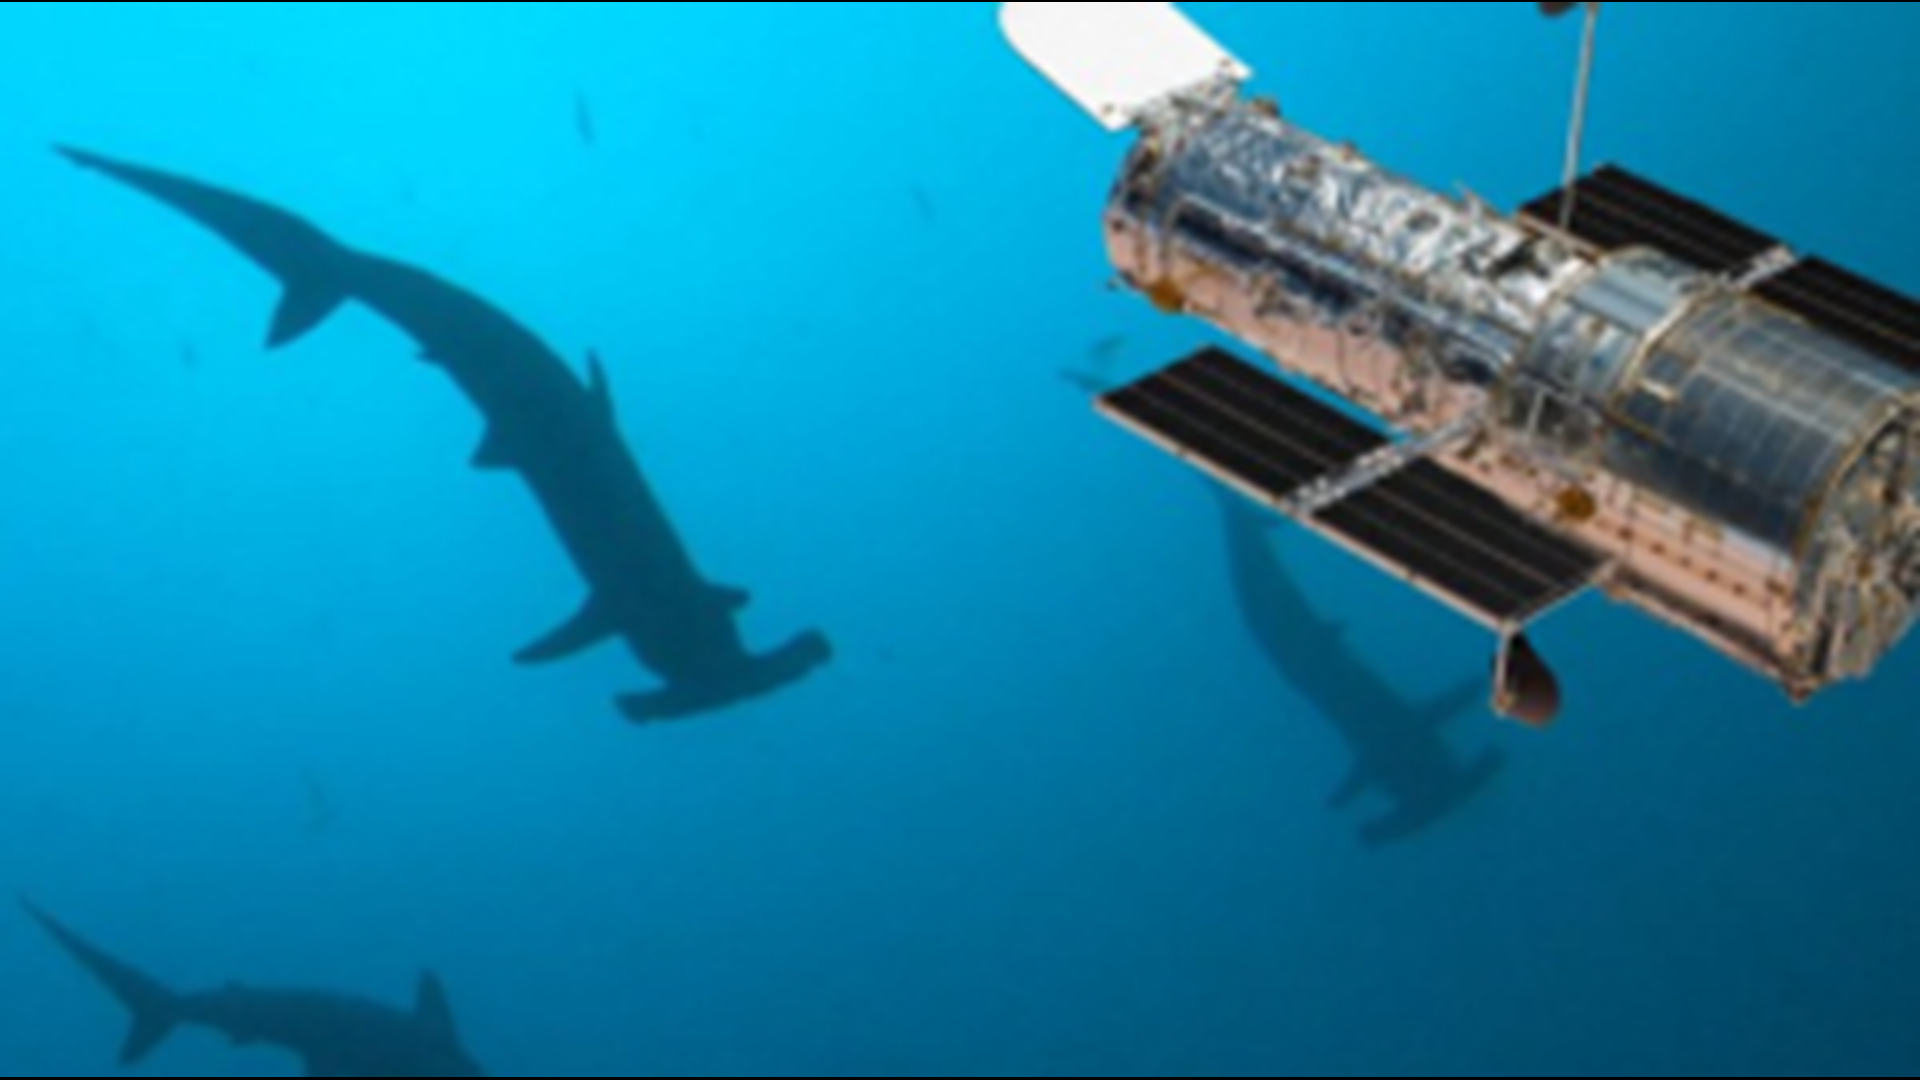 You wouldn't think NASA's Hubble Space Telescope would have anything in common with whale sharks, but they have a surprising connection.